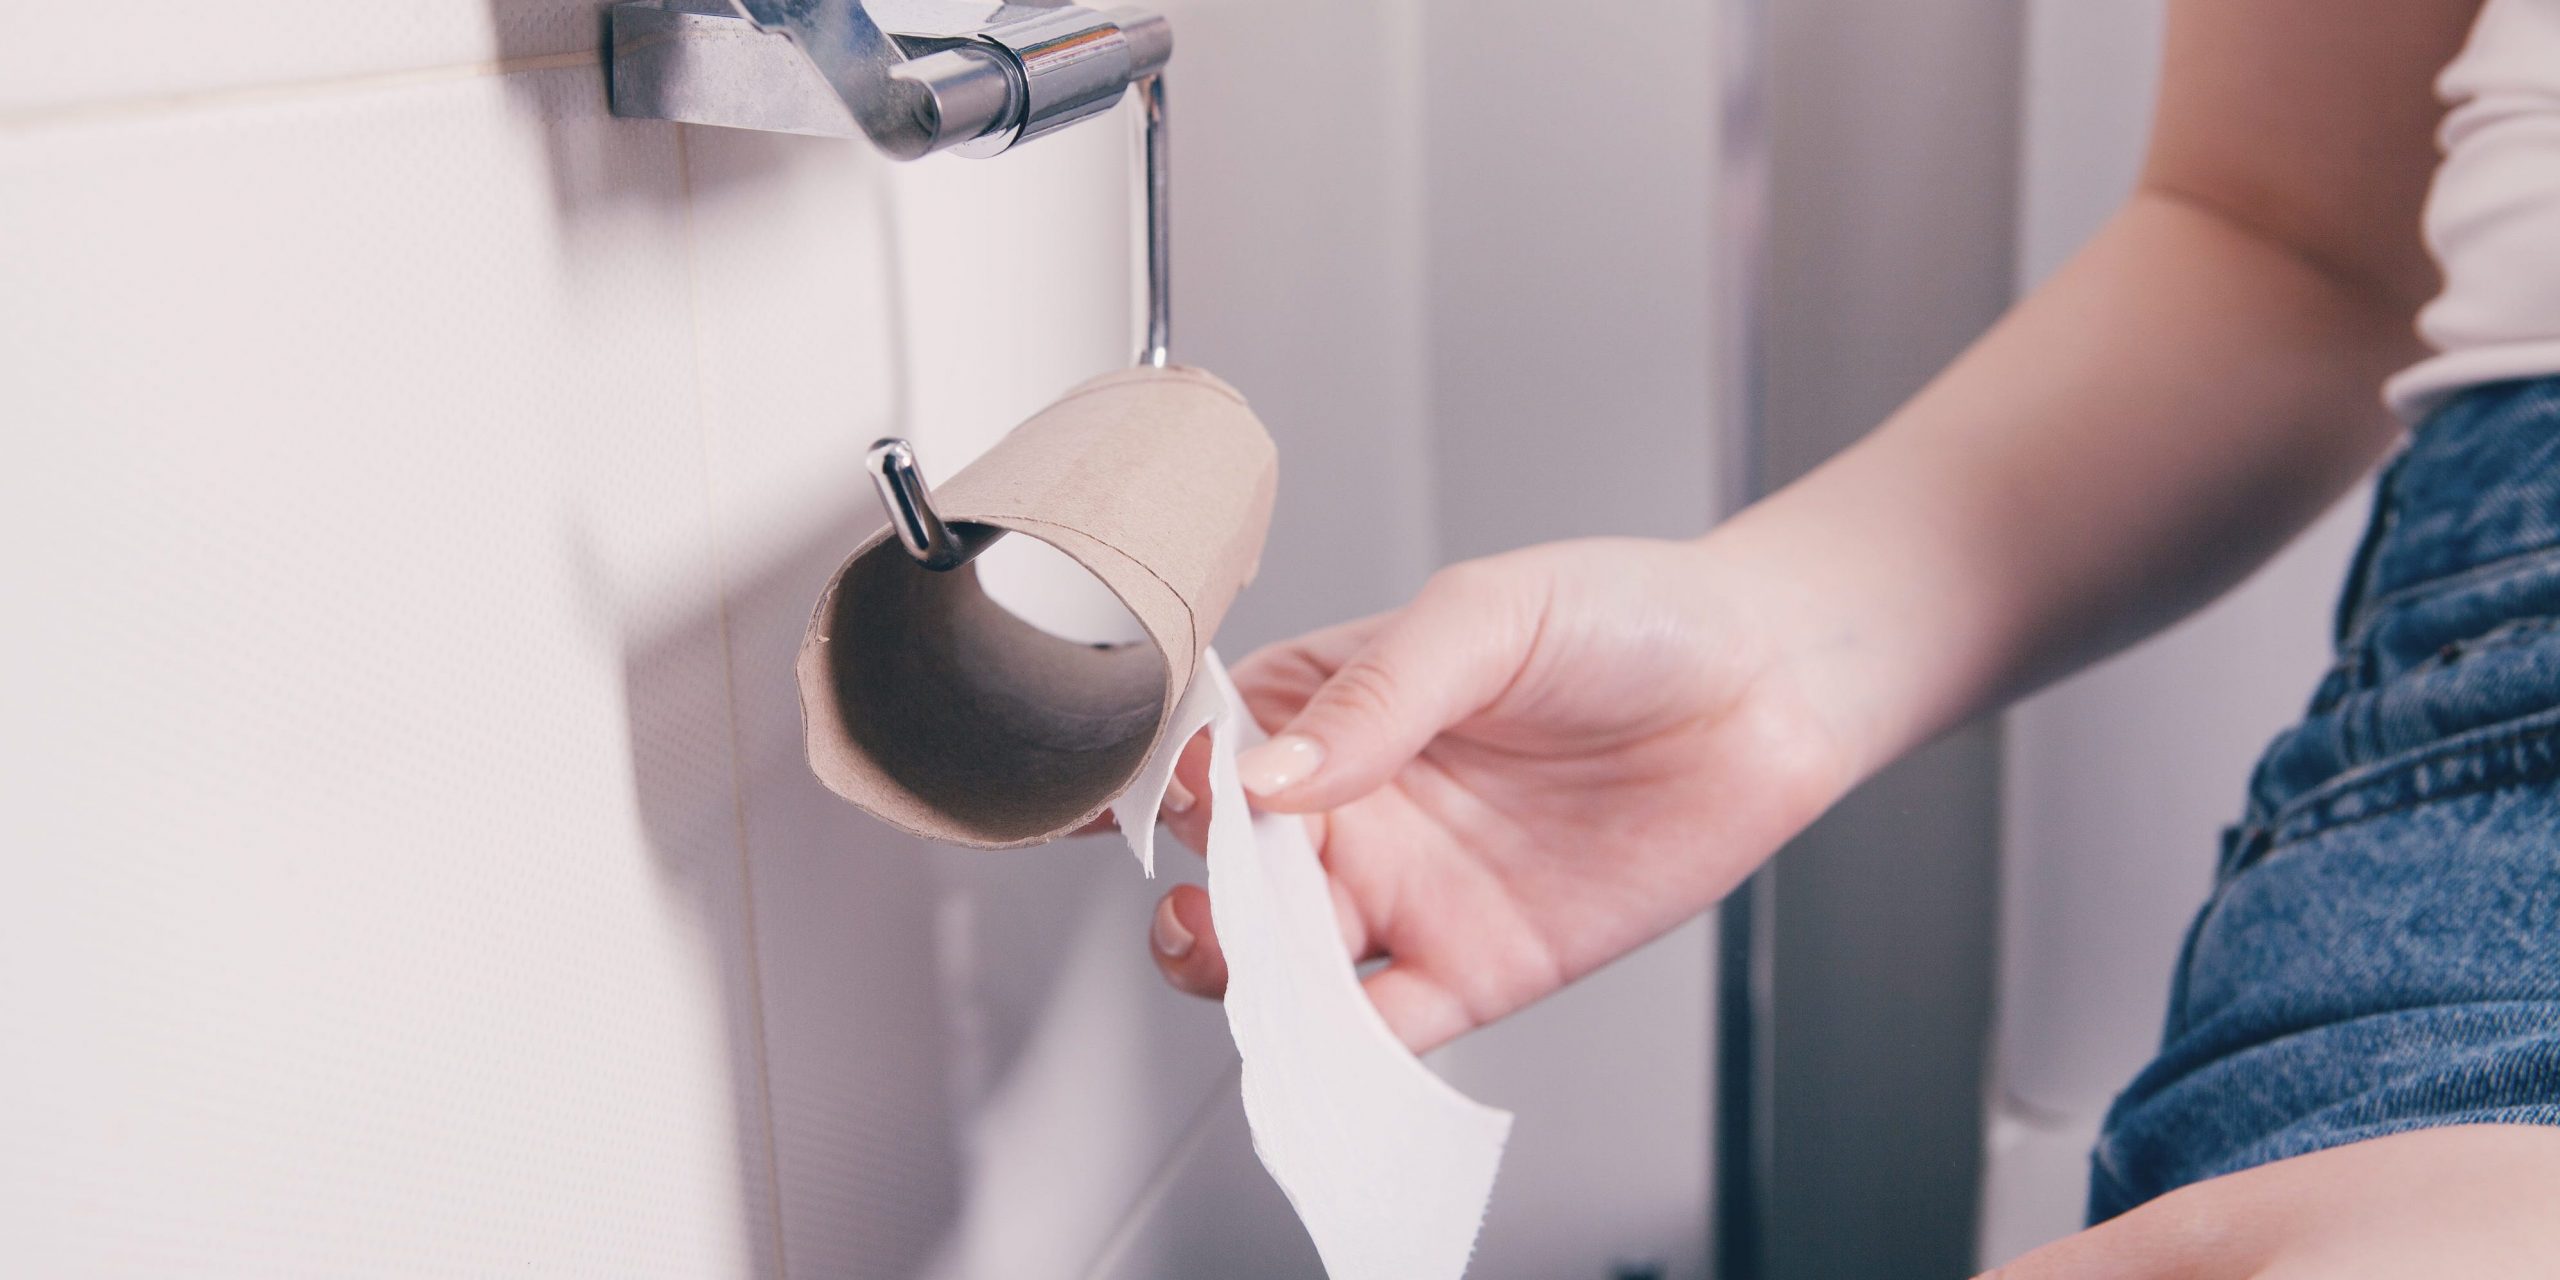 A woman sitting on a toilet holds the last sheet of toilet paper on a roll.